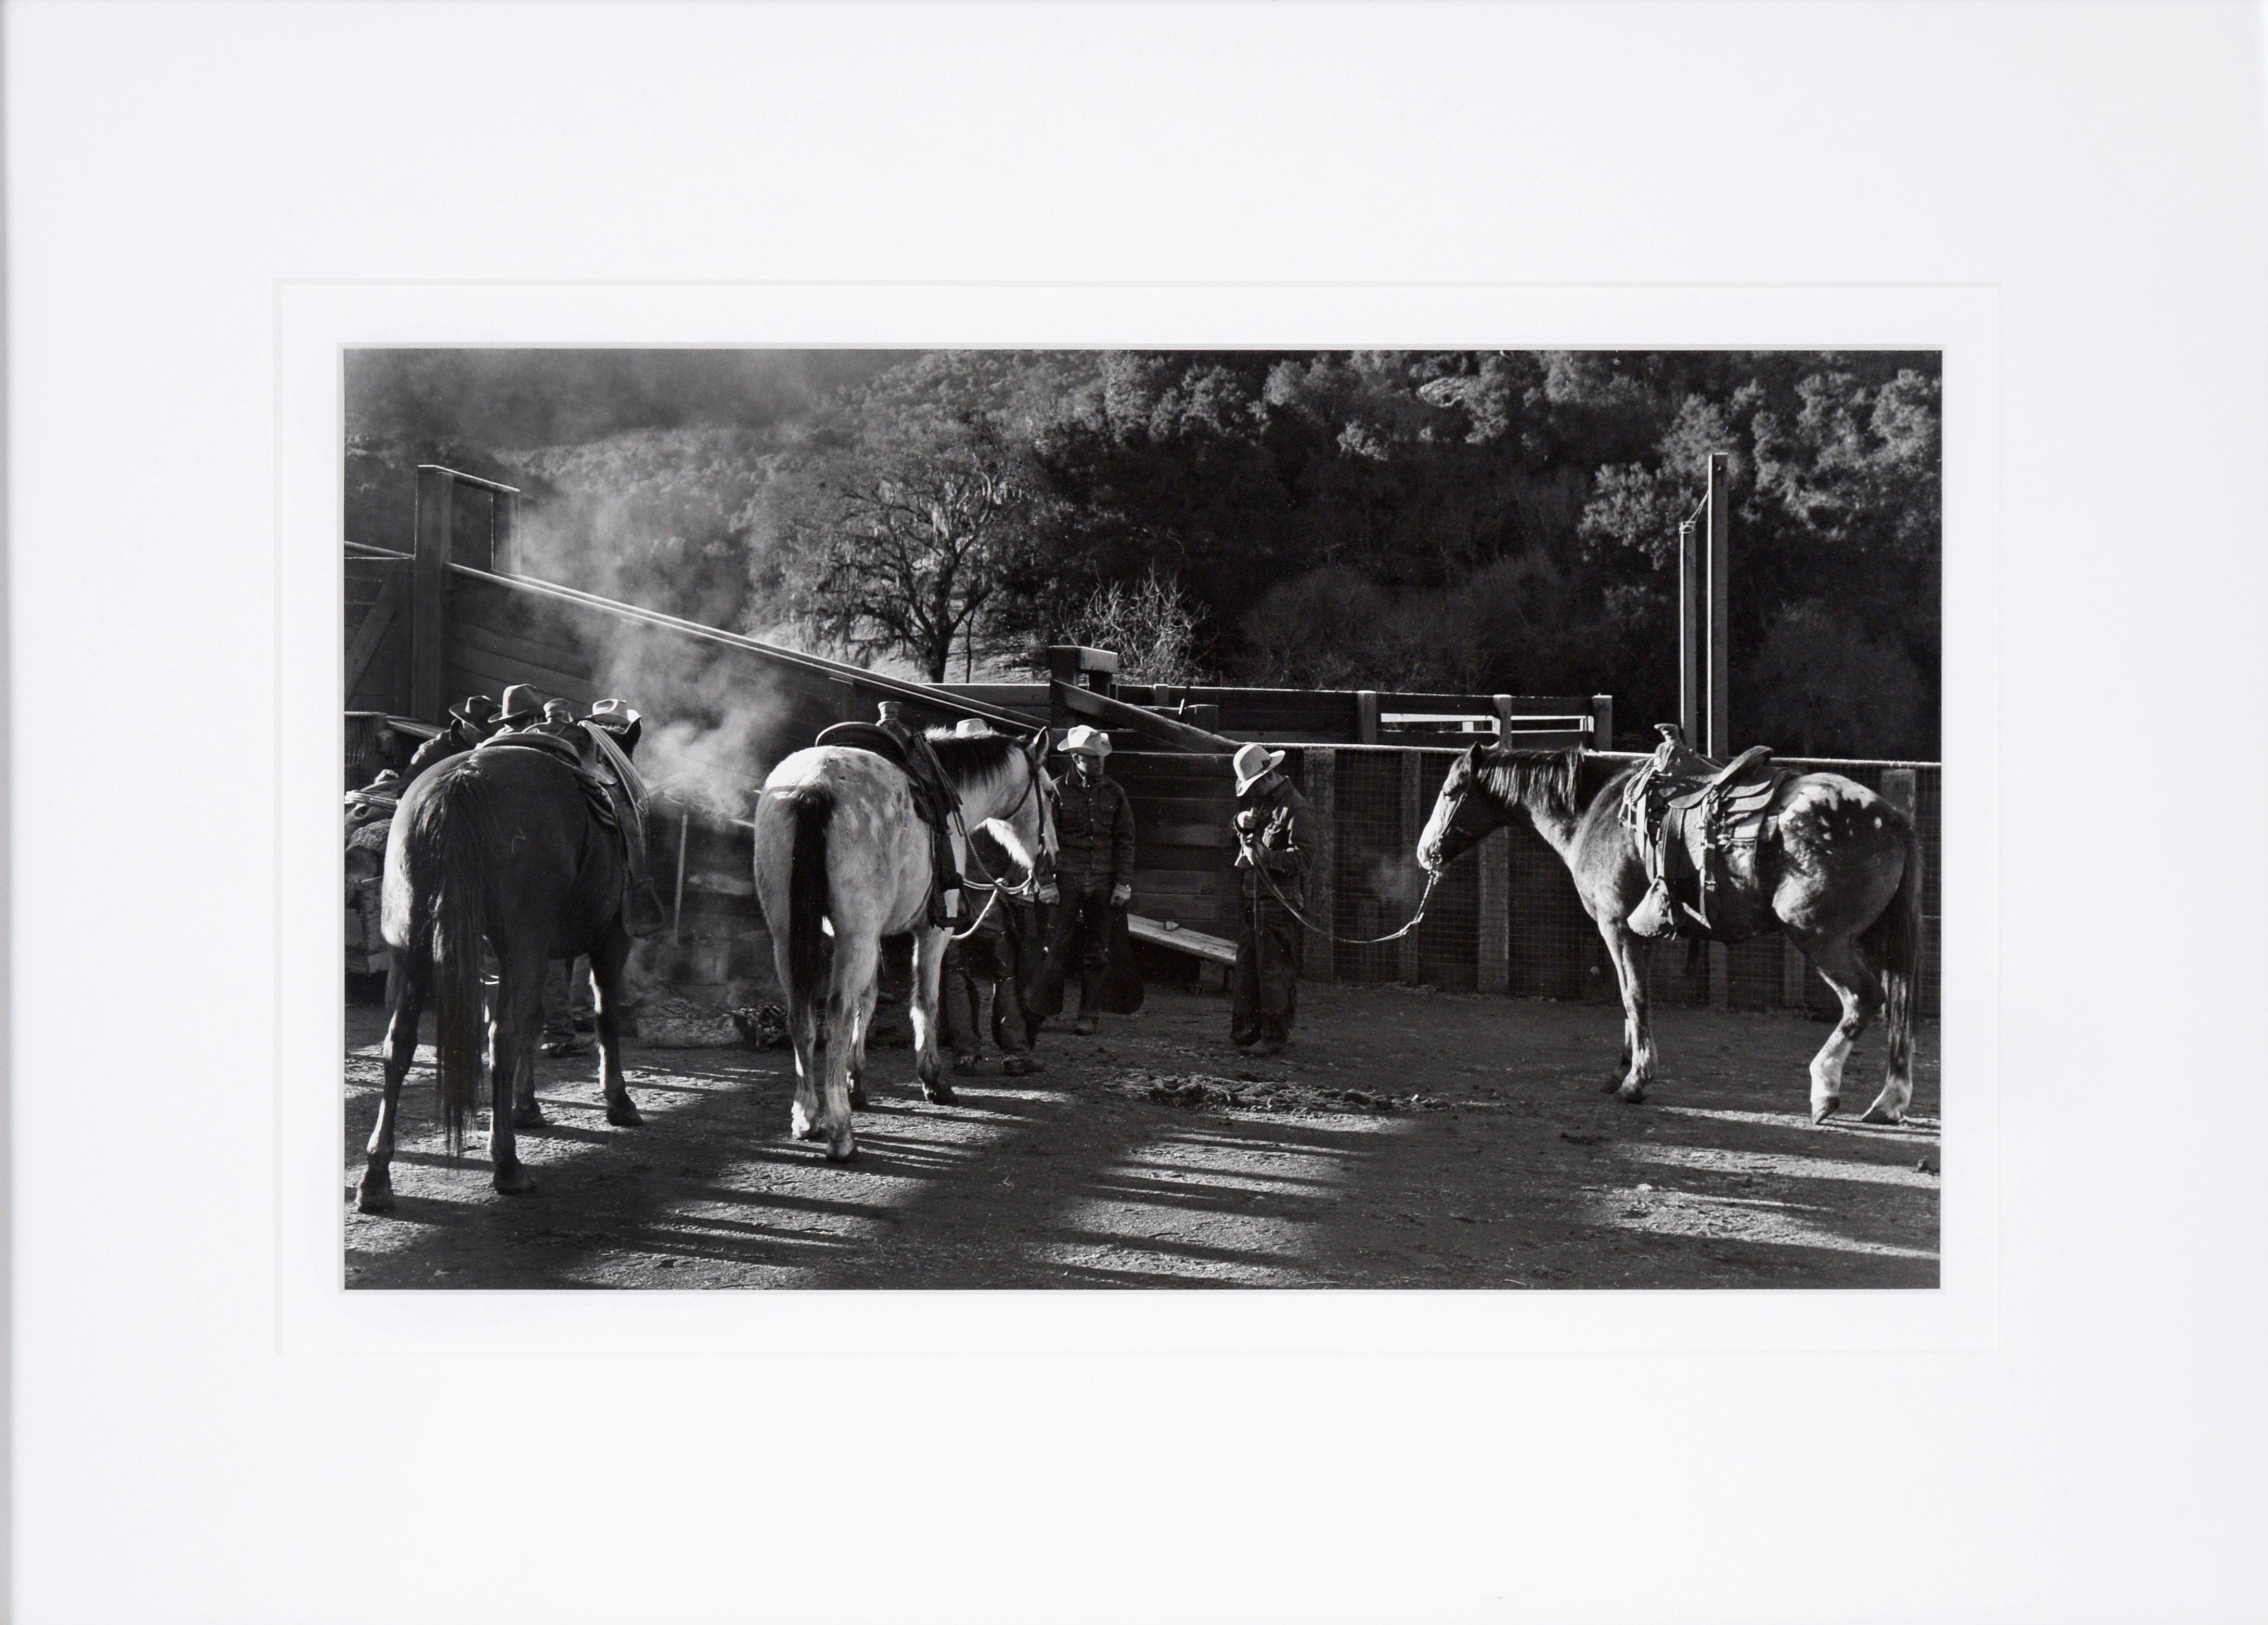 Rancho San Carlos Cattle Ranch, 1950's Photograph

1950's photograph of the San Carlos Cattle Ranch located south of Carmel Valley, California by James Ziegler (American). The ranch was owned by Arthur C Oppenheimer and shows cowboys and three